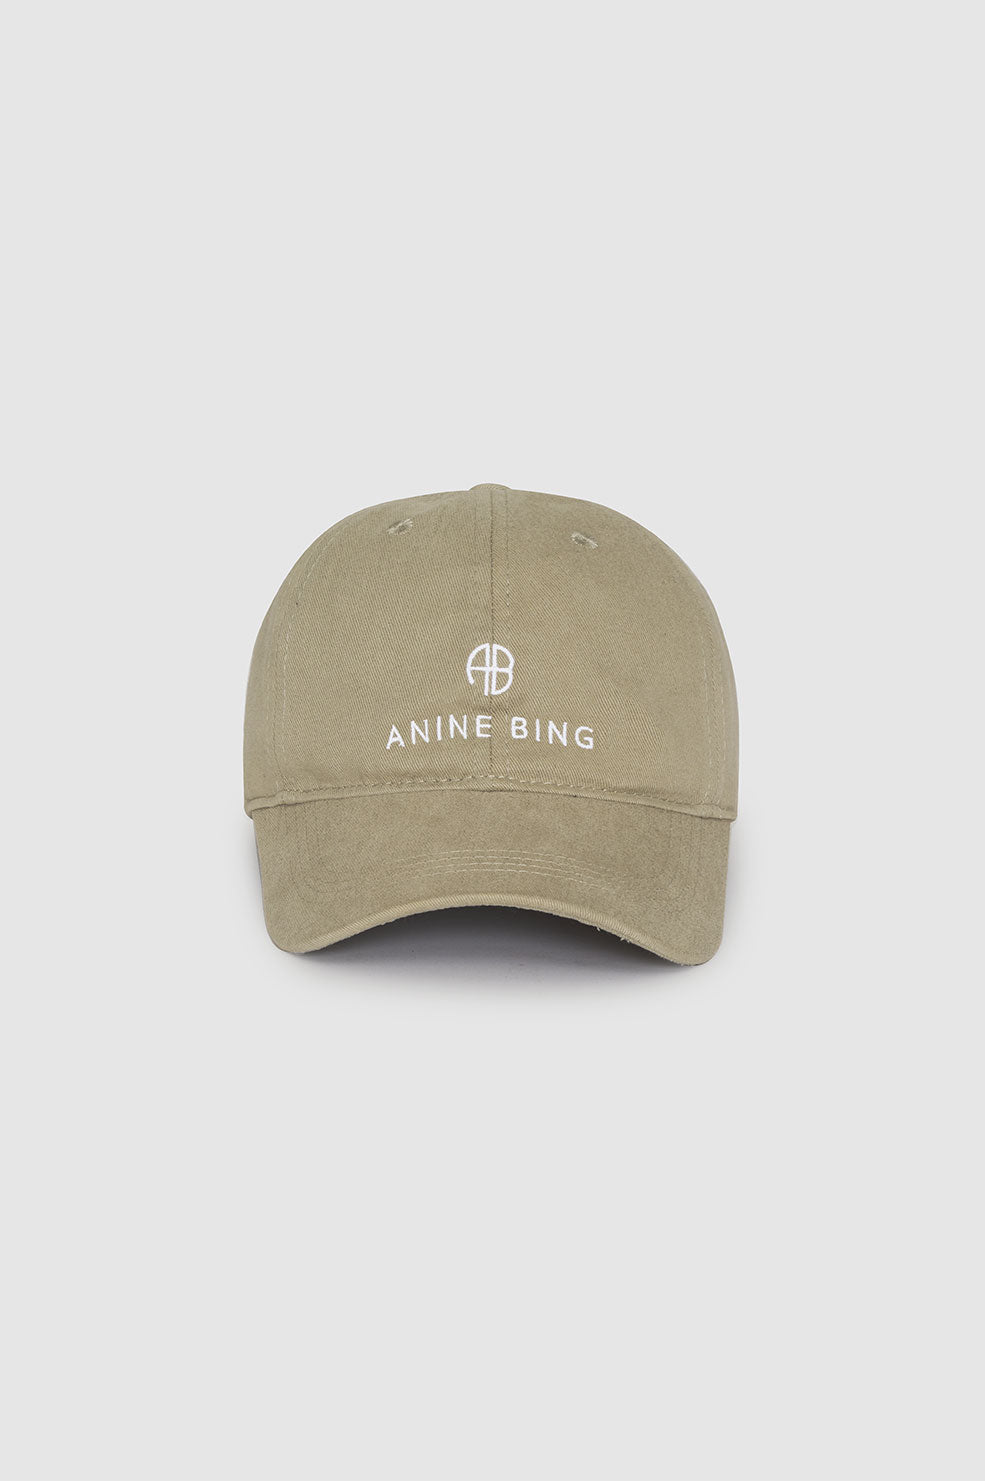 anine bing jeremy cap - OFF-53% >Free Delivery